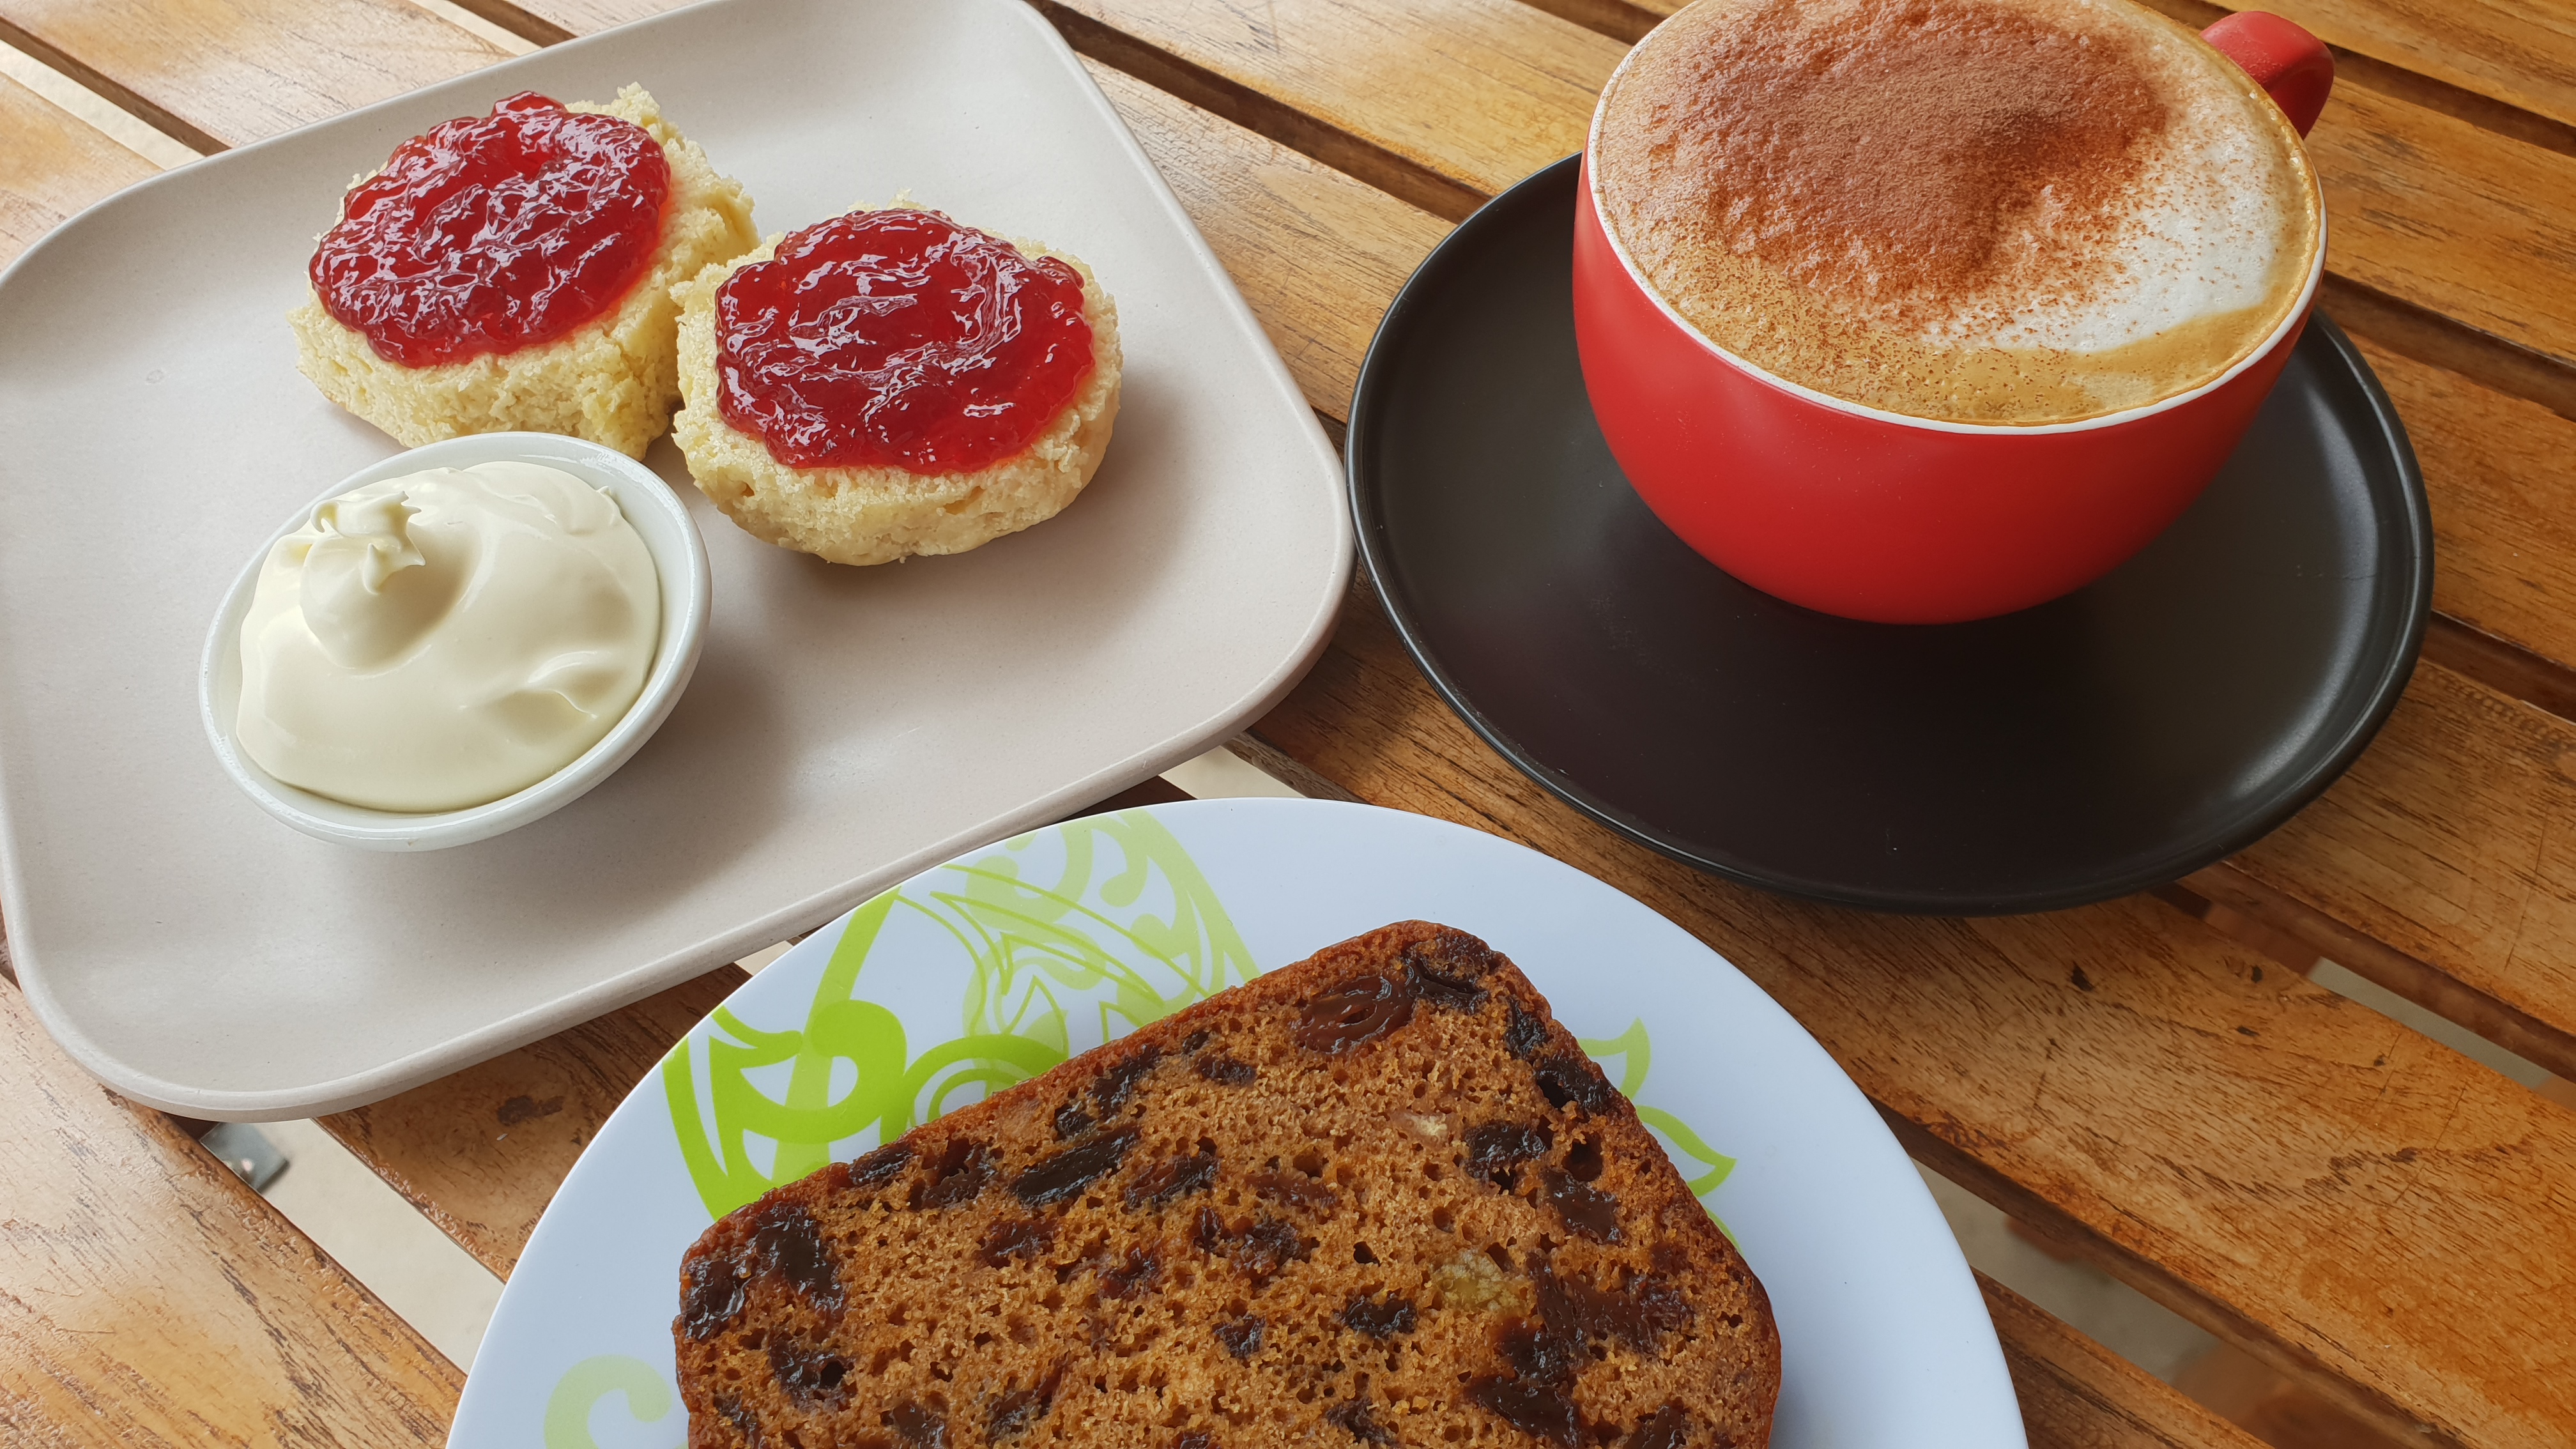 Scones, cakes and real coffee